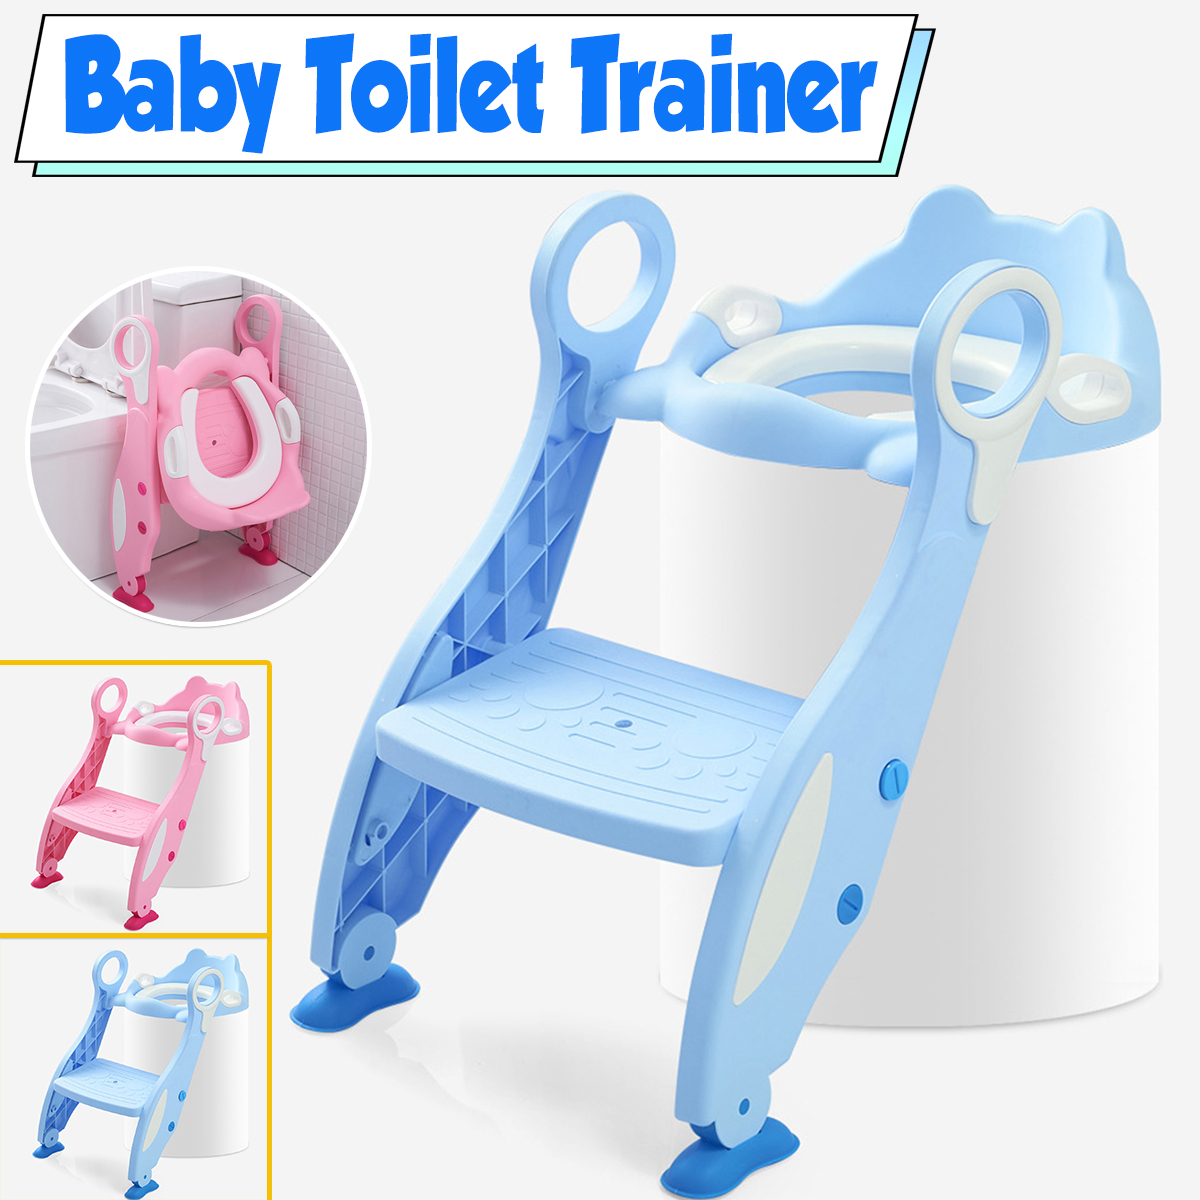 Foldable-Kids-Potty-Trainer-Child-Baby-Toilet-Training-Seat-W-Step-Ladder-Stool-1770408-1